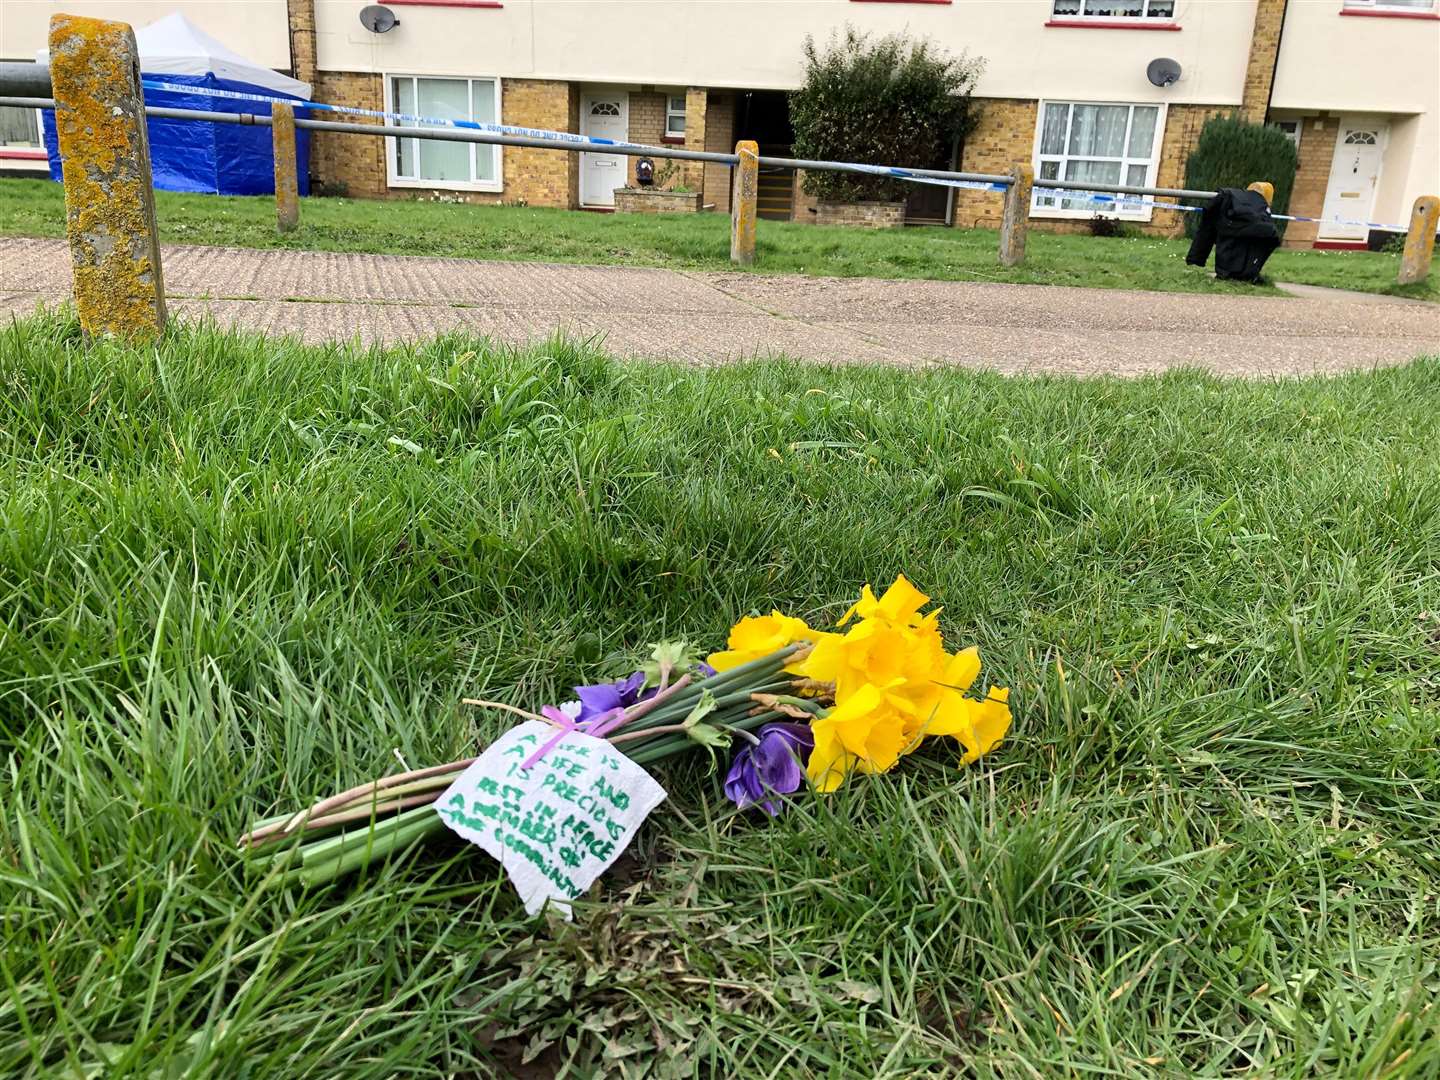 Flowers at Cambridge Crescent after a man was found dead